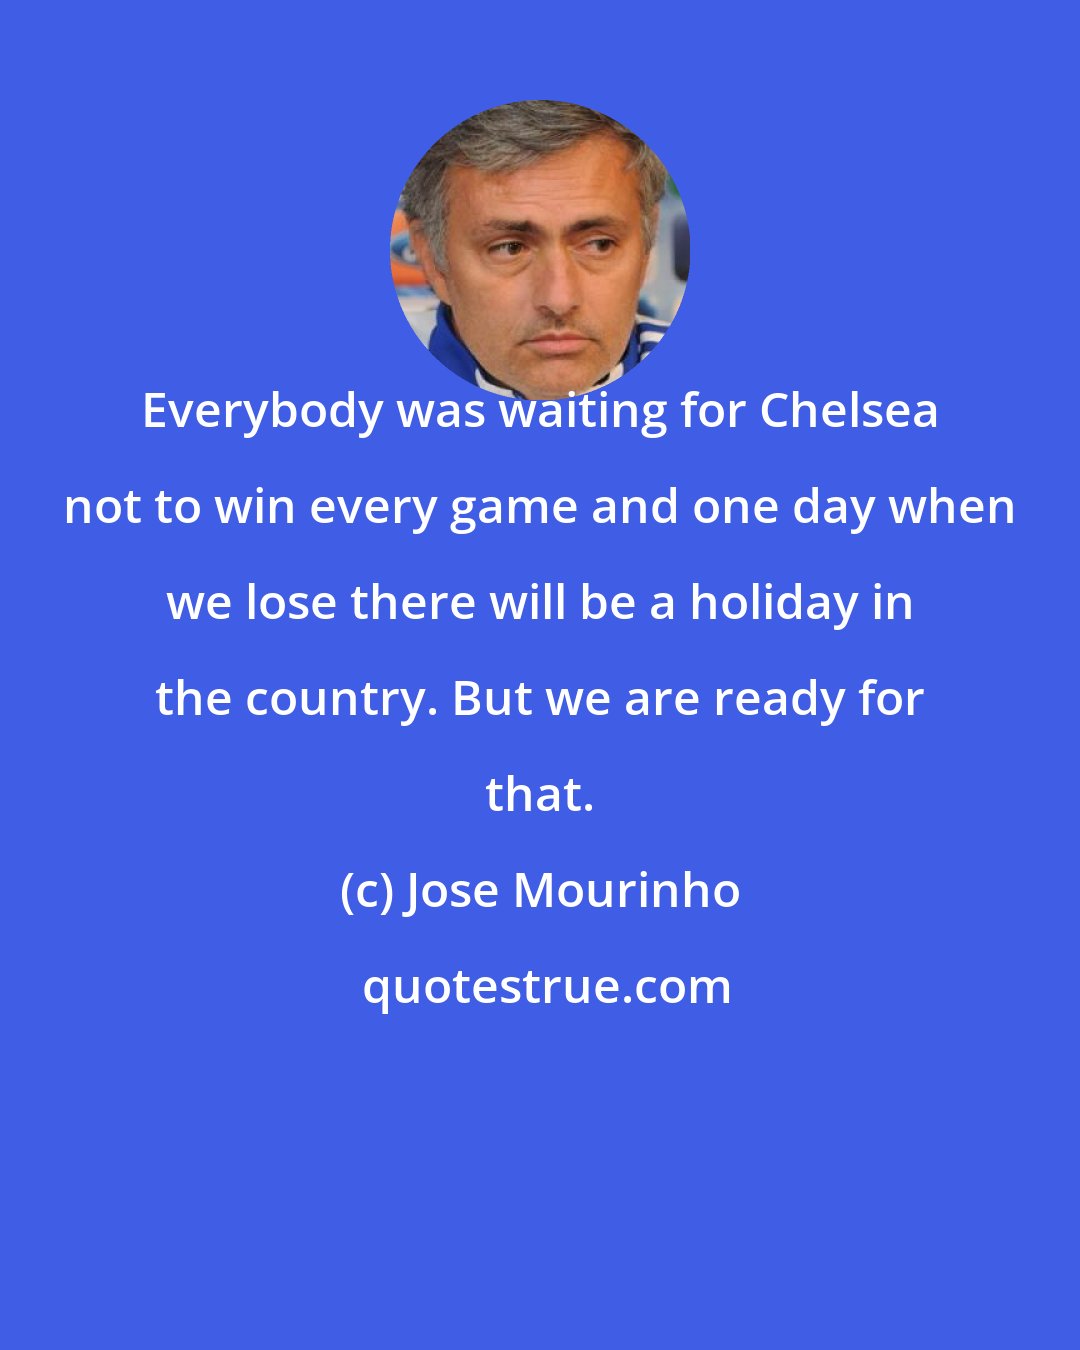 Jose Mourinho: Everybody was waiting for Chelsea not to win every game and one day when we lose there will be a holiday in the country. But we are ready for that.